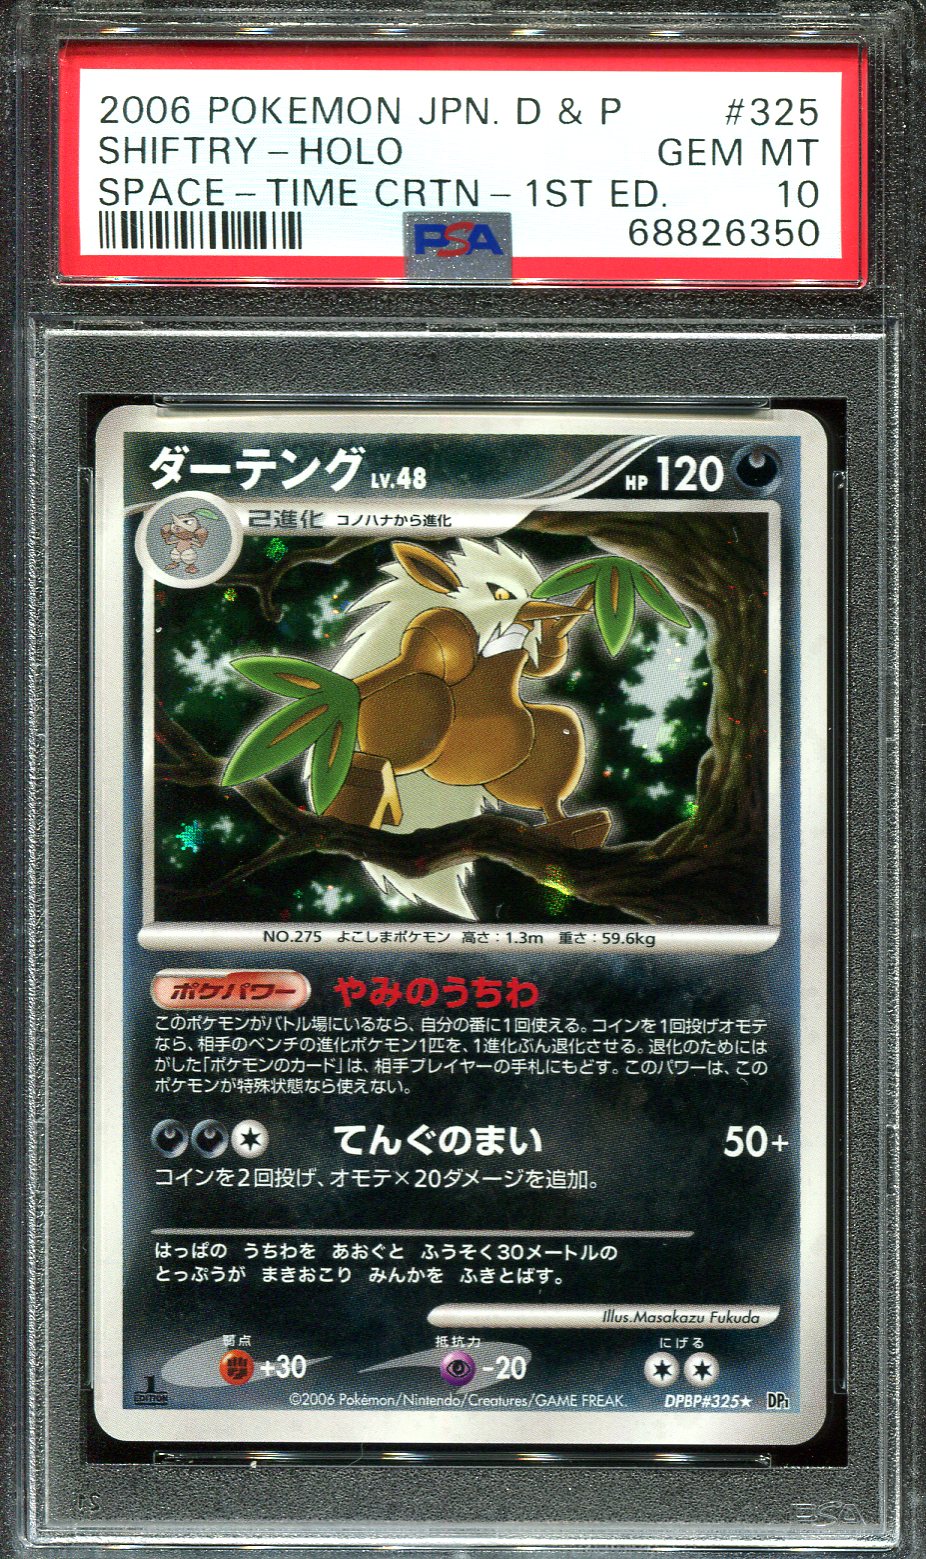 SHIFTRY 325 PSA 10 POKEMON SPACE TIME CREATION DP1 JAPANESE